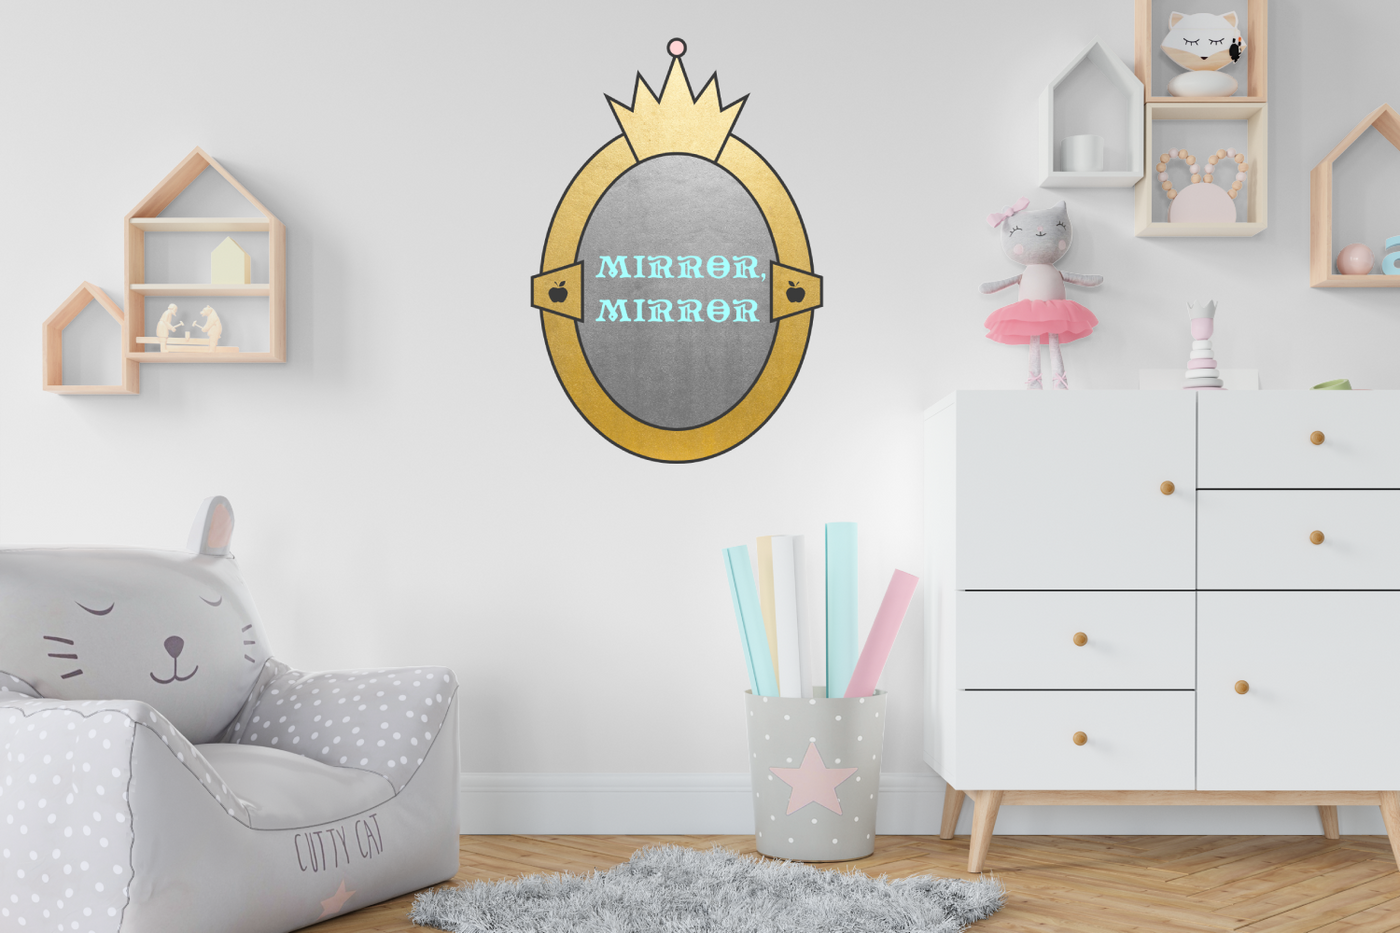 Child's room with a wall decal of a gold mirror that says "mirror, mirror."